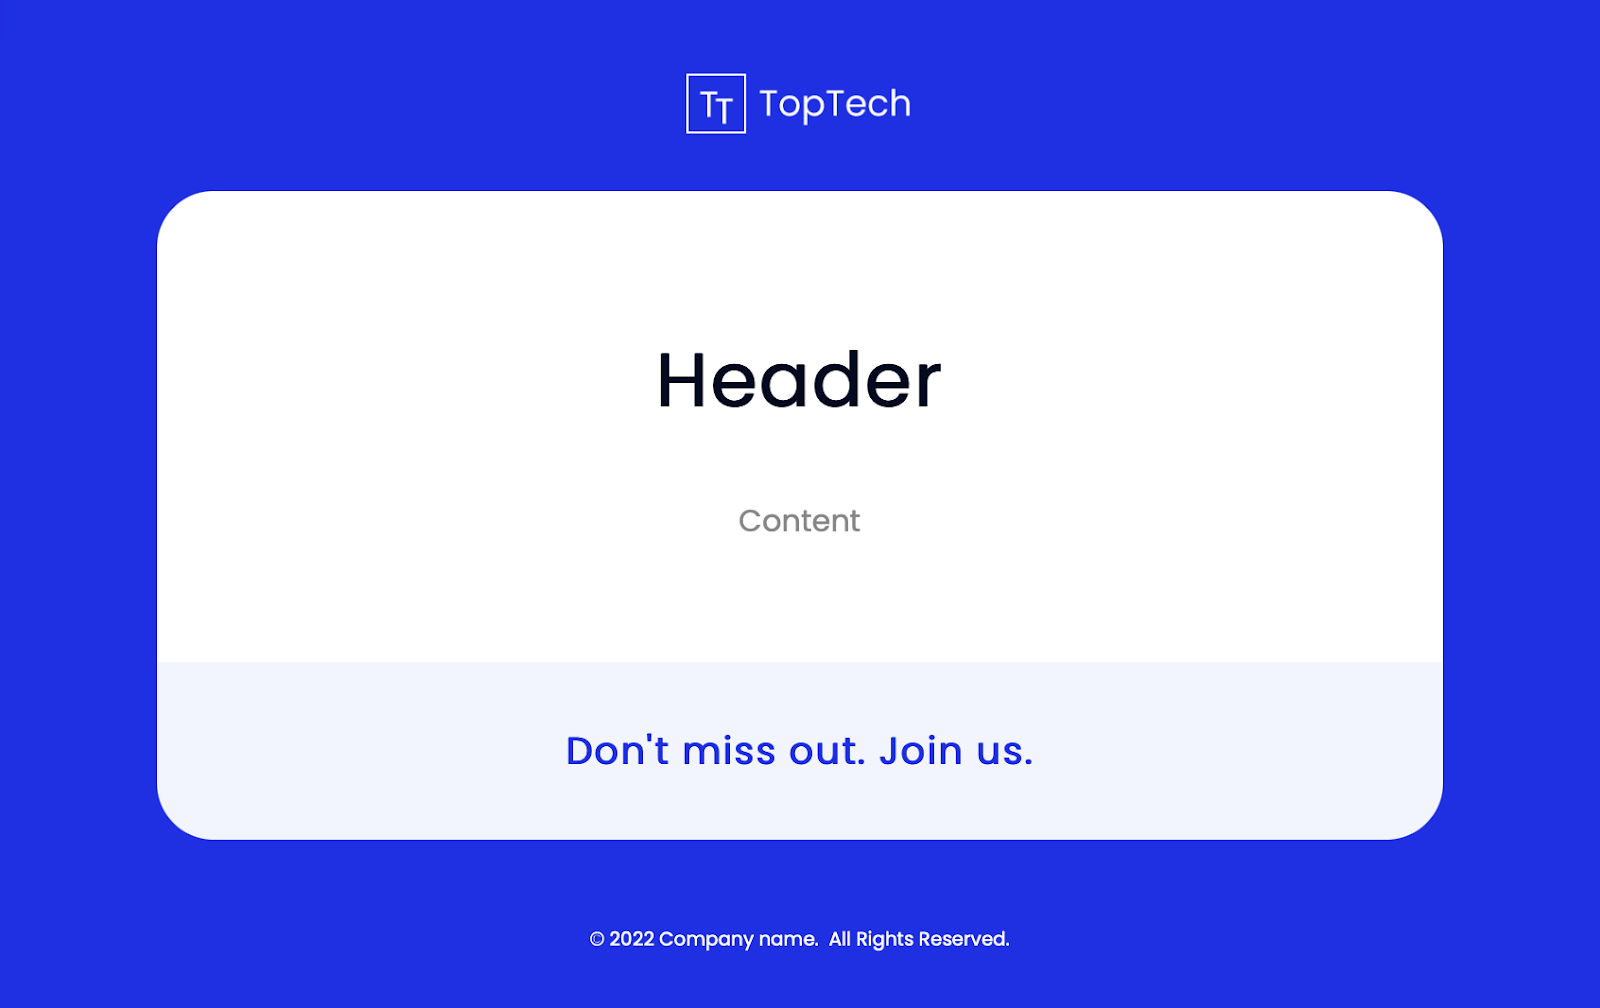 A designed boilerplate email with clear placeholders for header text and content